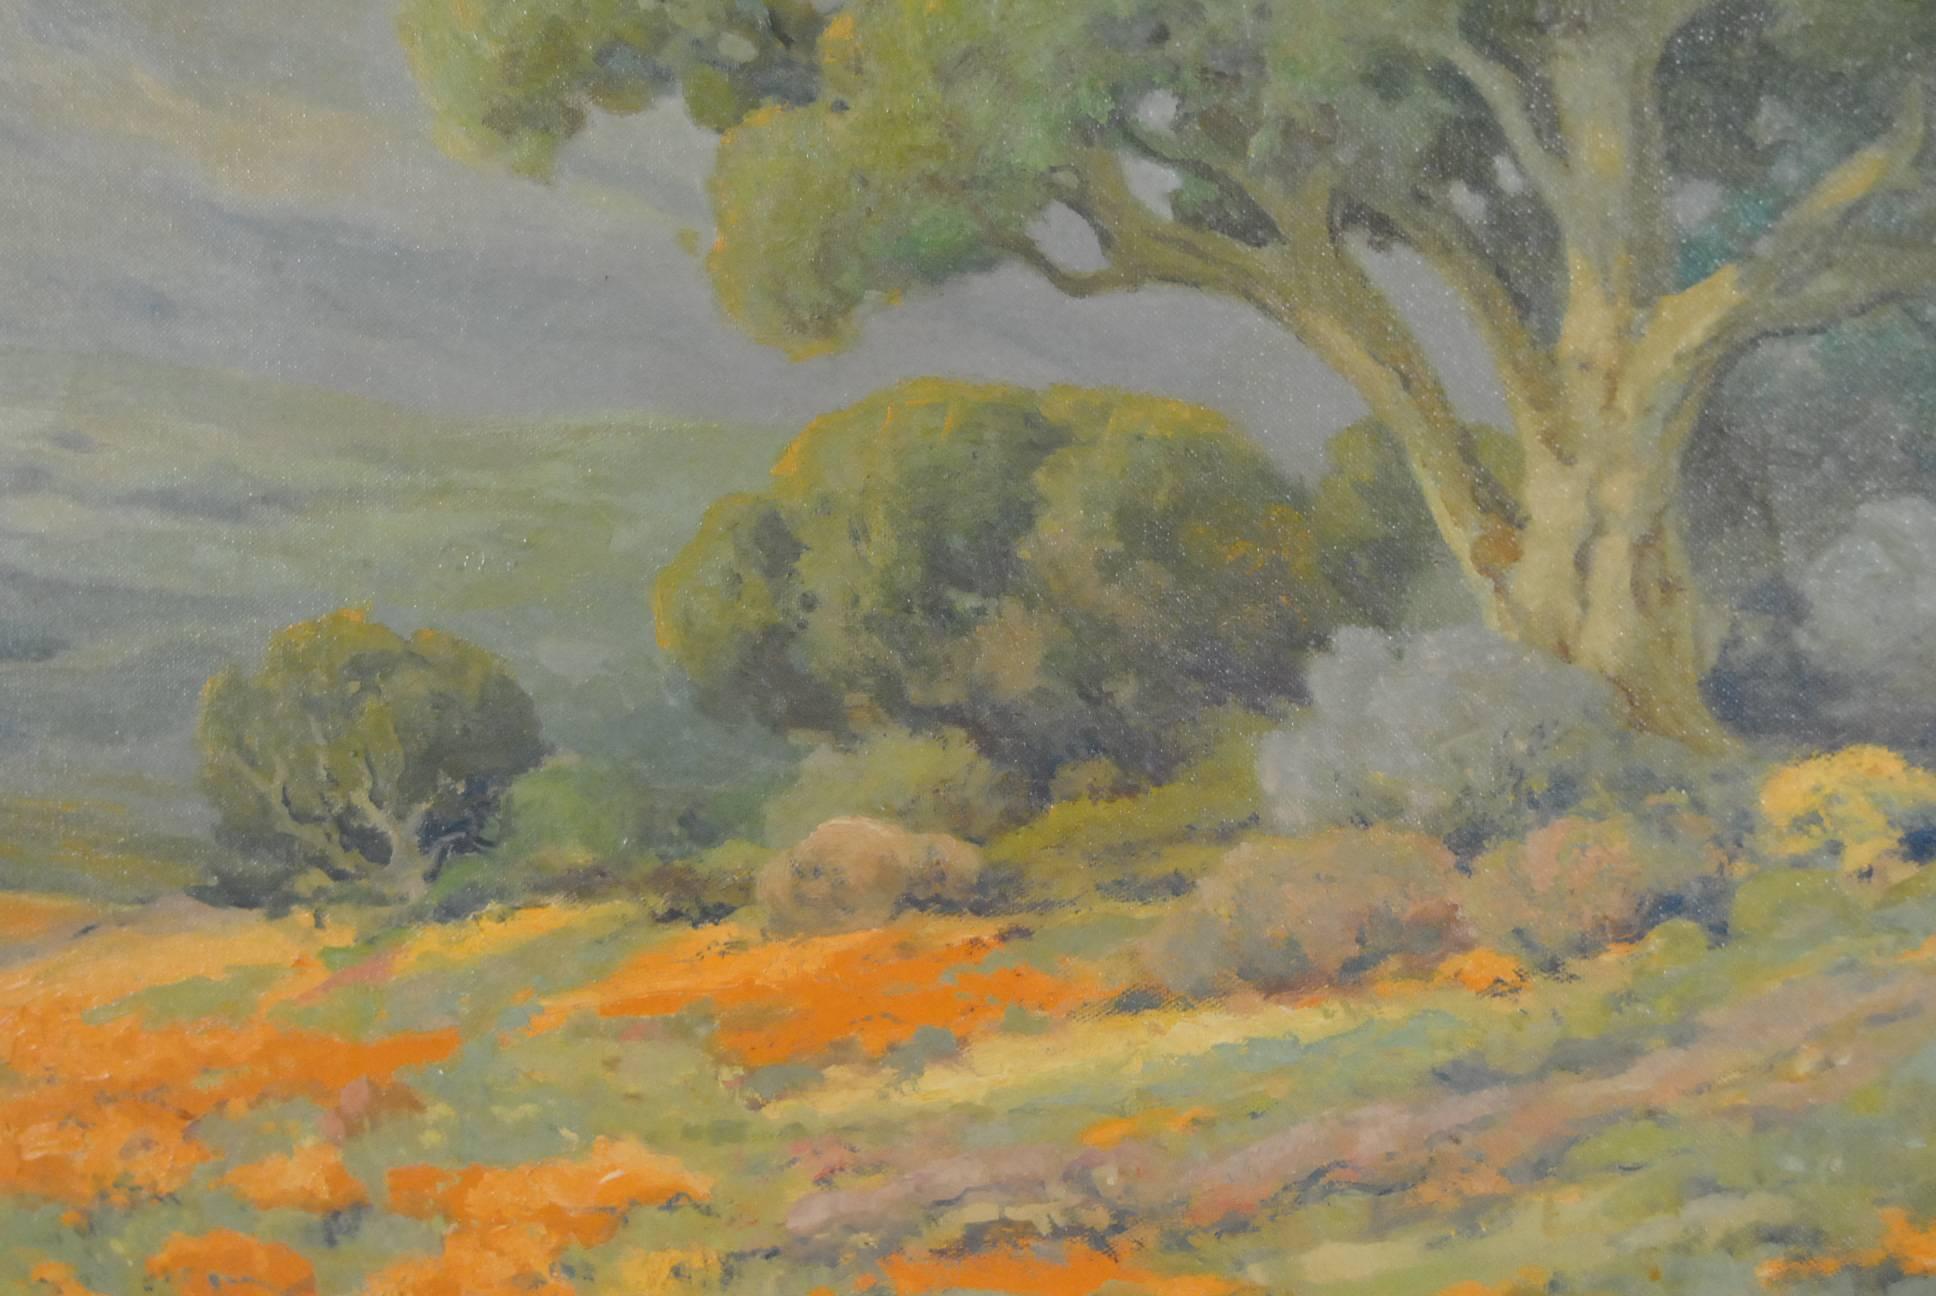 Other Poppies Oil on Canvas Hillside Near Bakersfield, CA by Angel Espoy